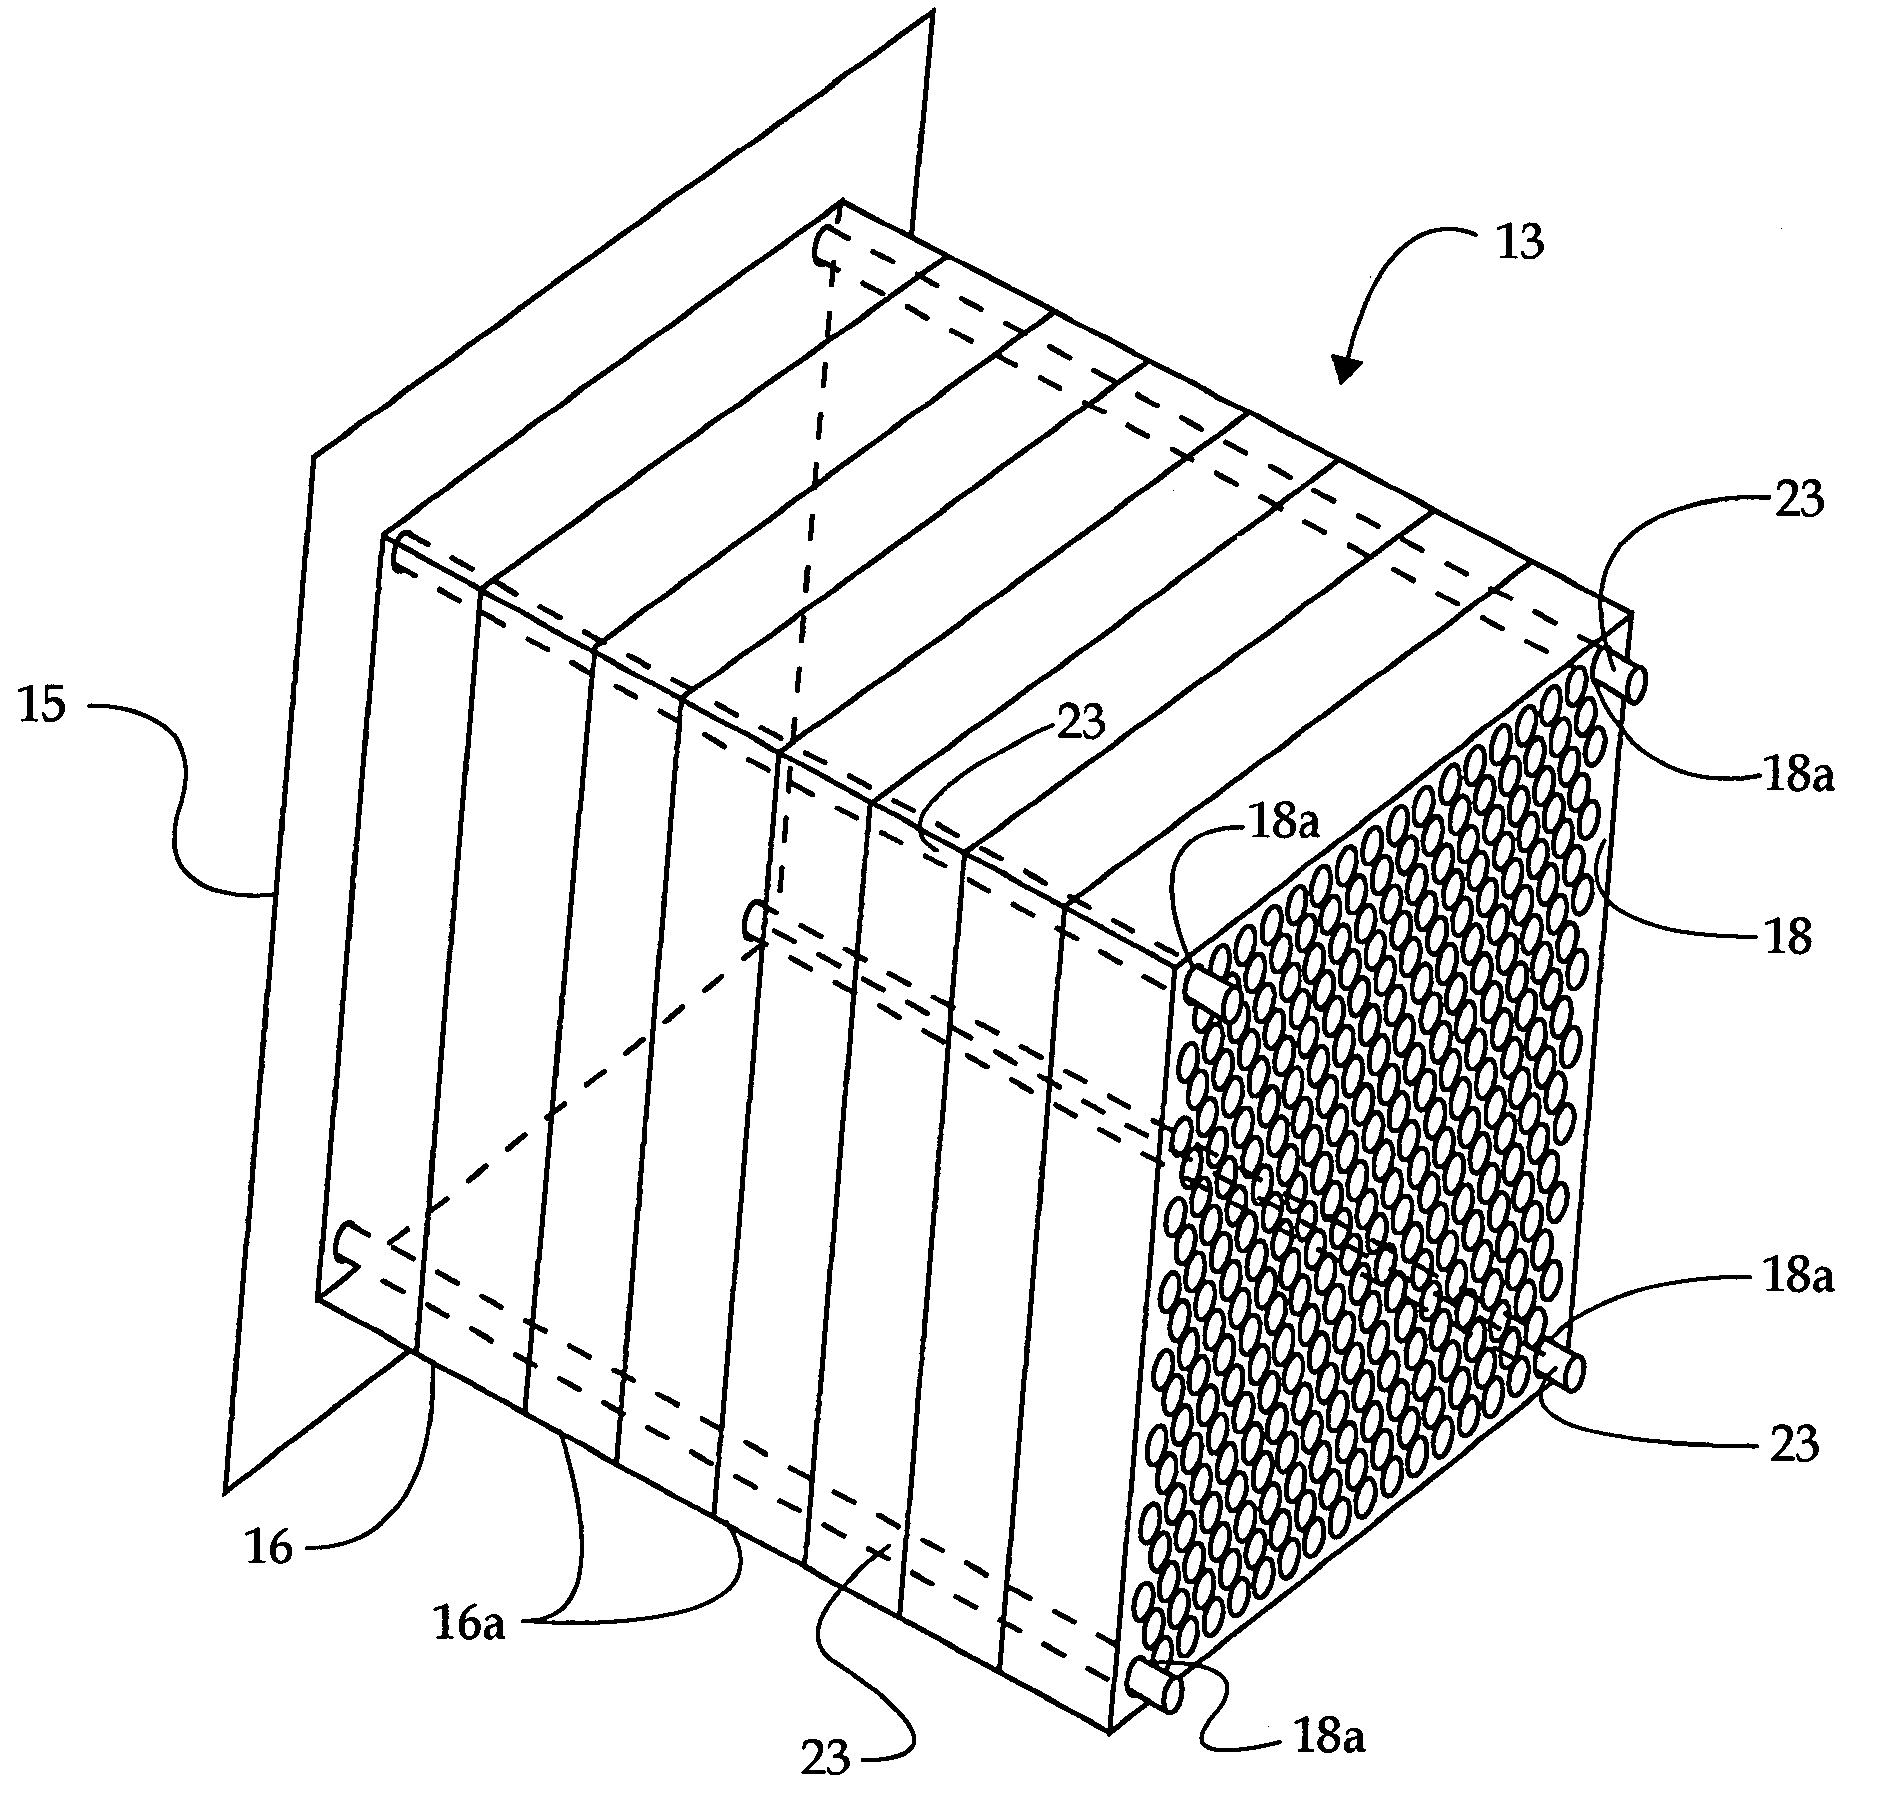 Machine housing component with acoustic media grille and method of attenuating machine noise